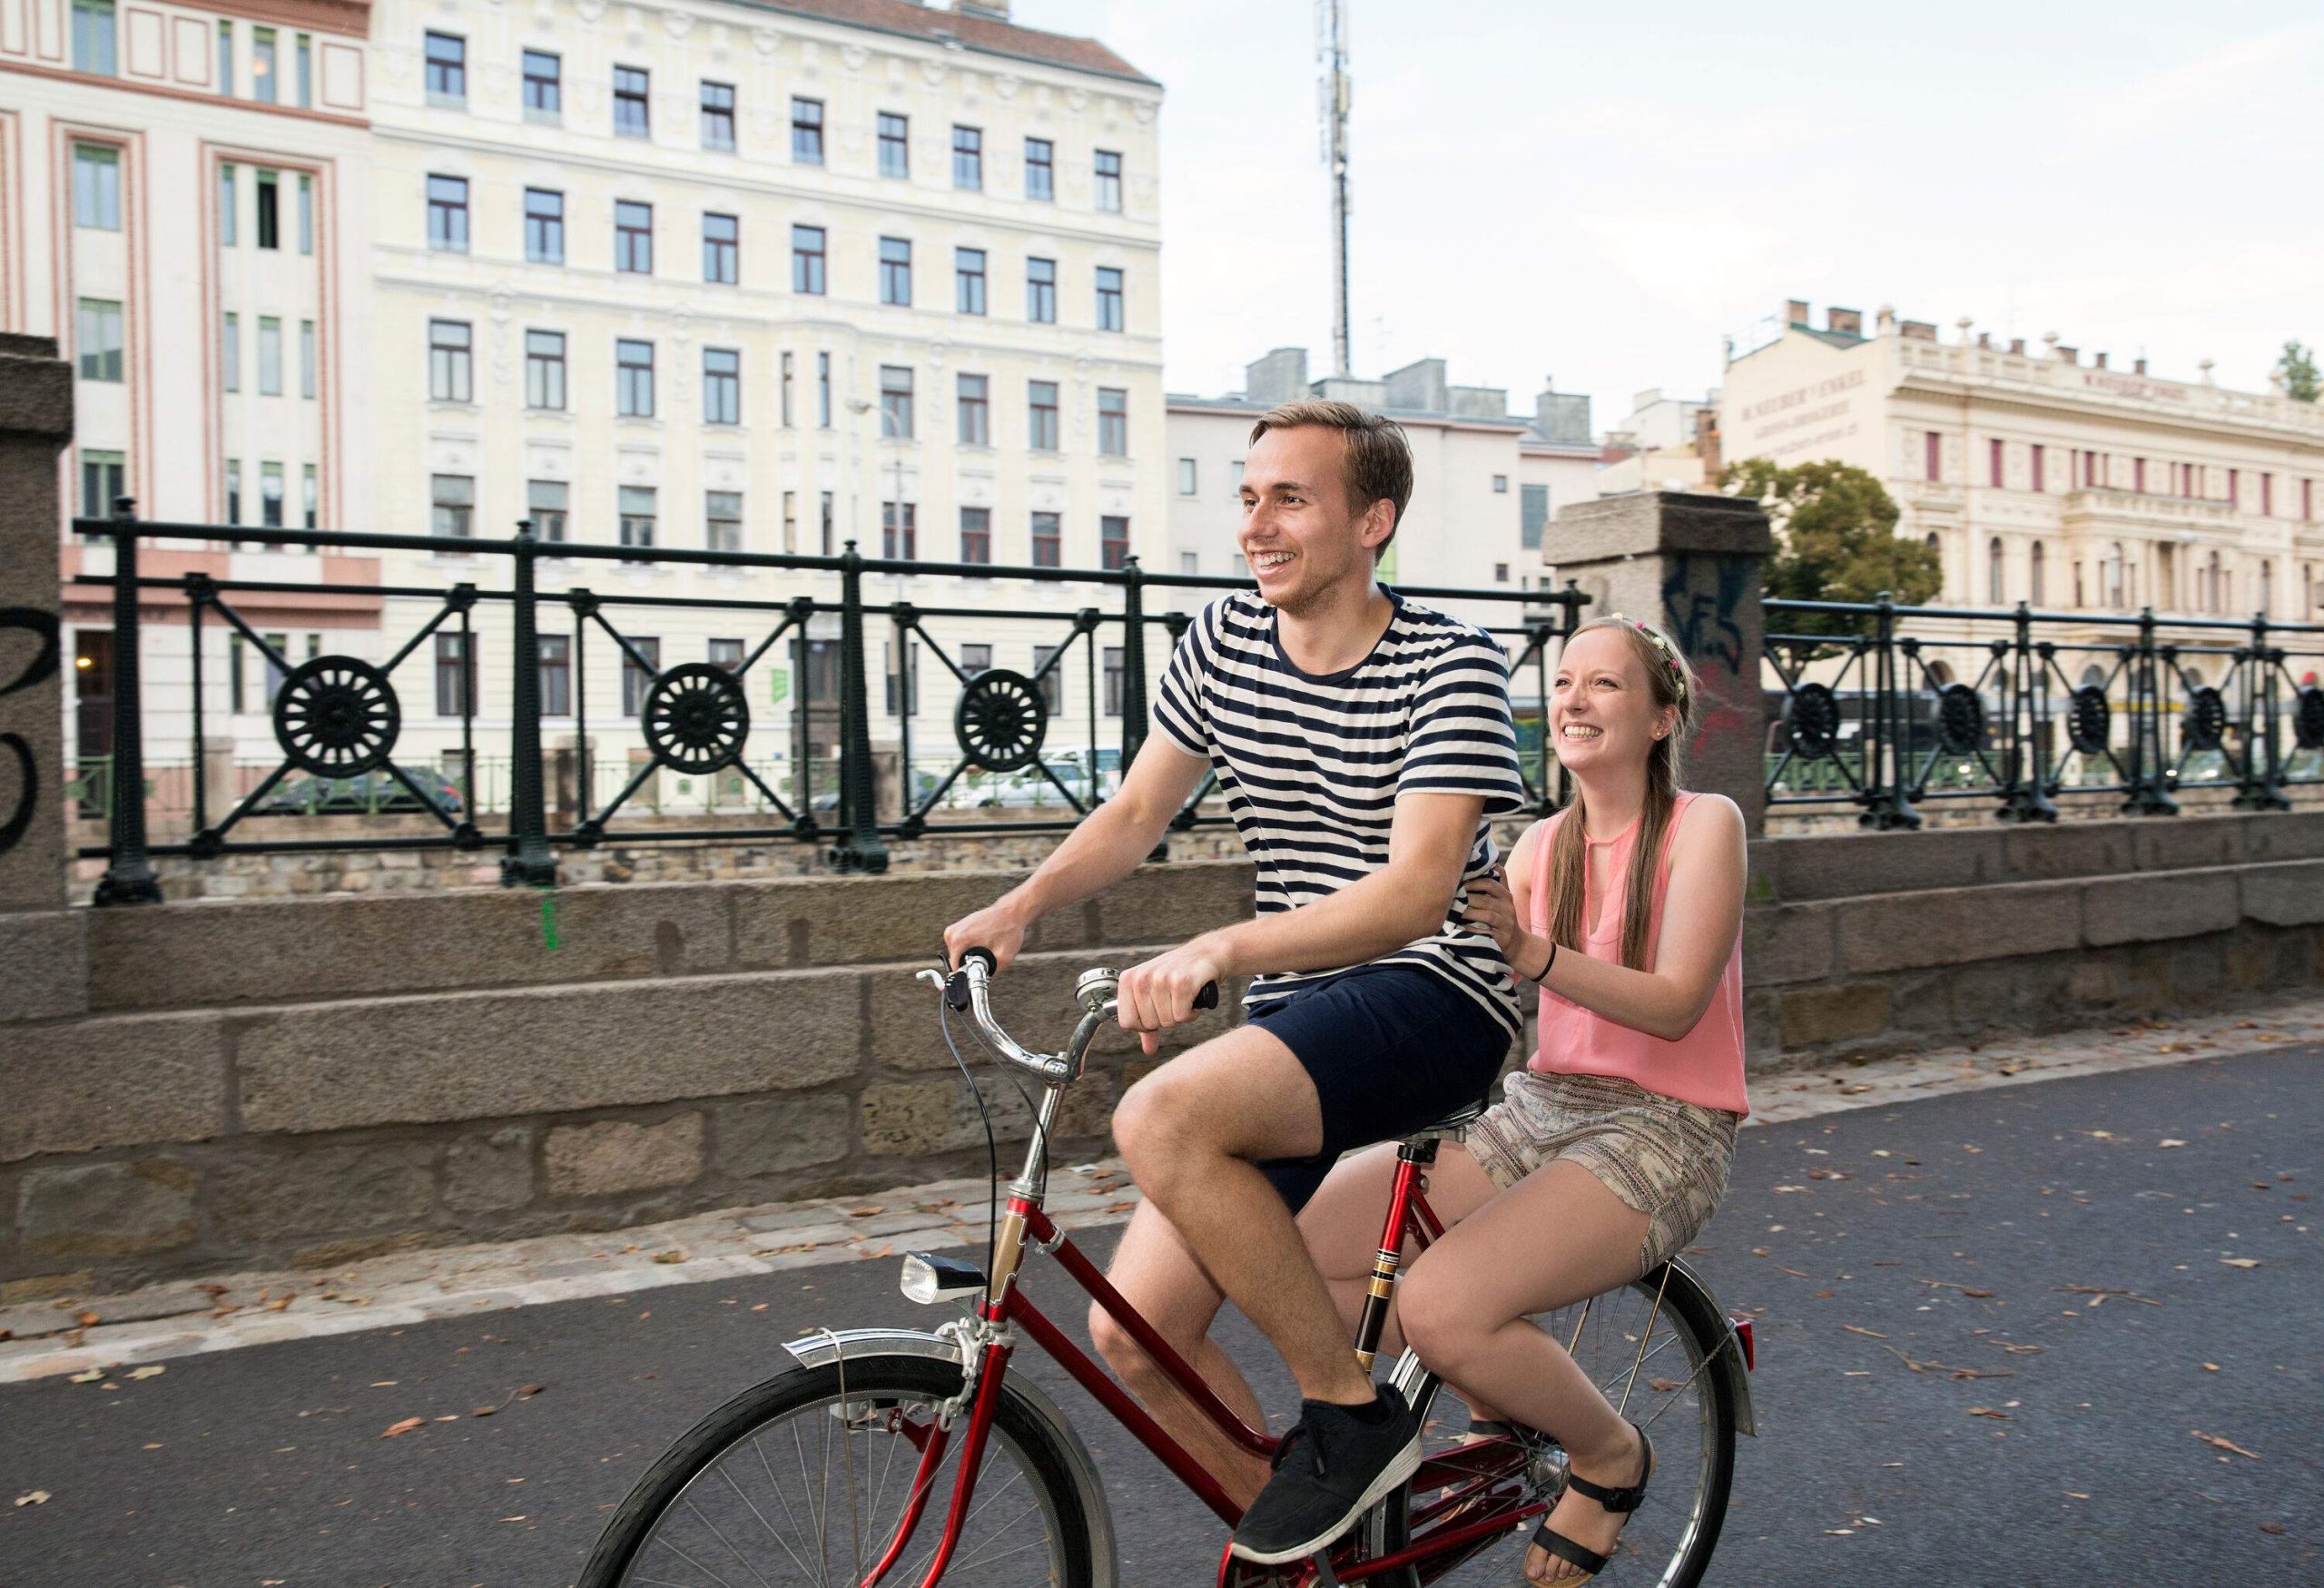 A delightful couple pedals together on a bicycle, enjoying a shared adventure and the beauty of their surroundings.